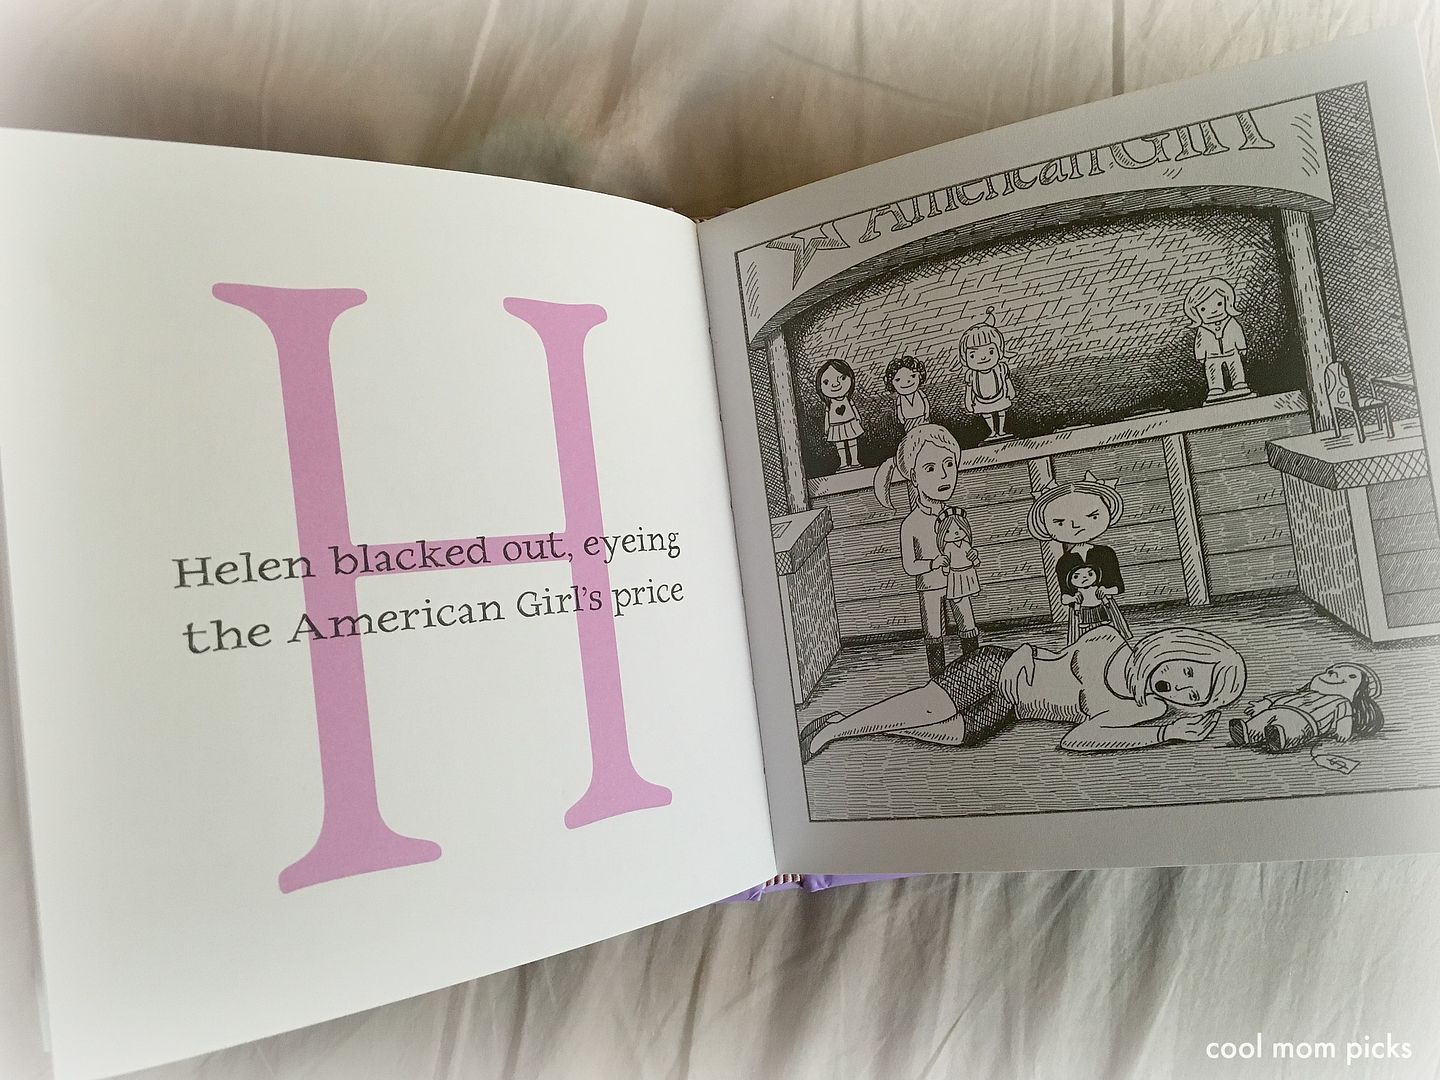 Hurts Like a Mother: Hilariously dark alphabet book for moms in the spirit of Edward Gorey